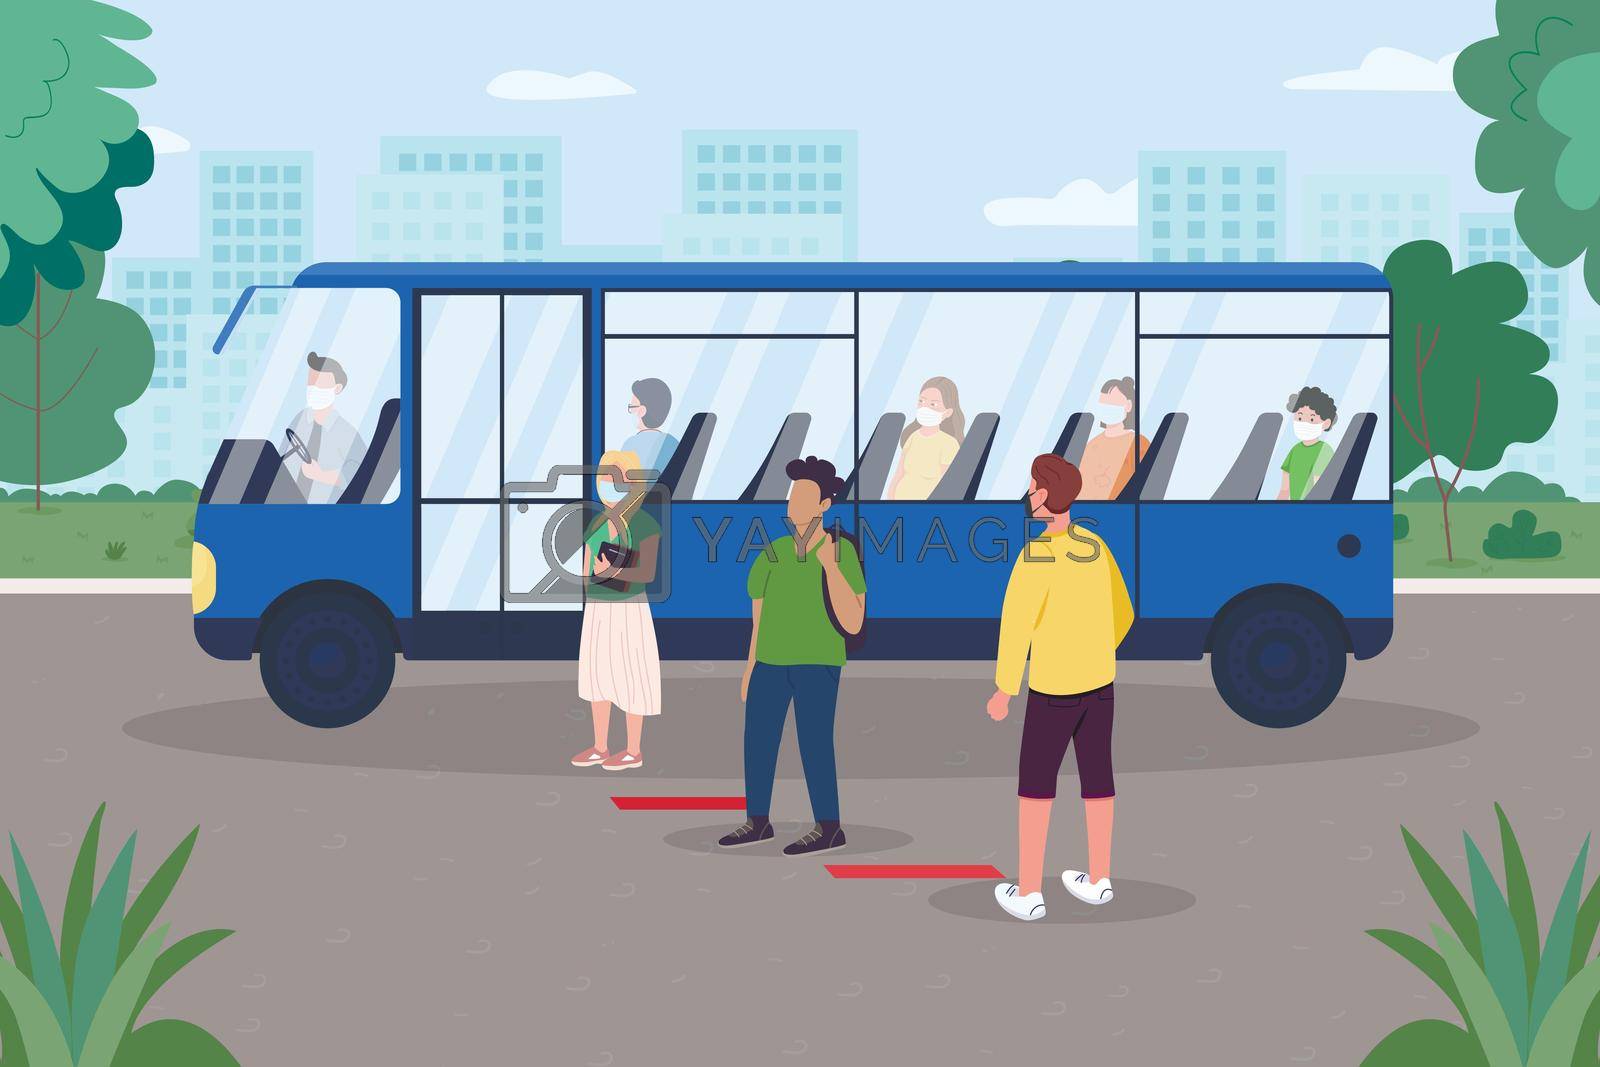 Social distancing for public transport flat color vector illustration. Covid pandemic. Virus spread prevention. Bus passengers in medical masks 2D cartoon characters with outdoor scene on background